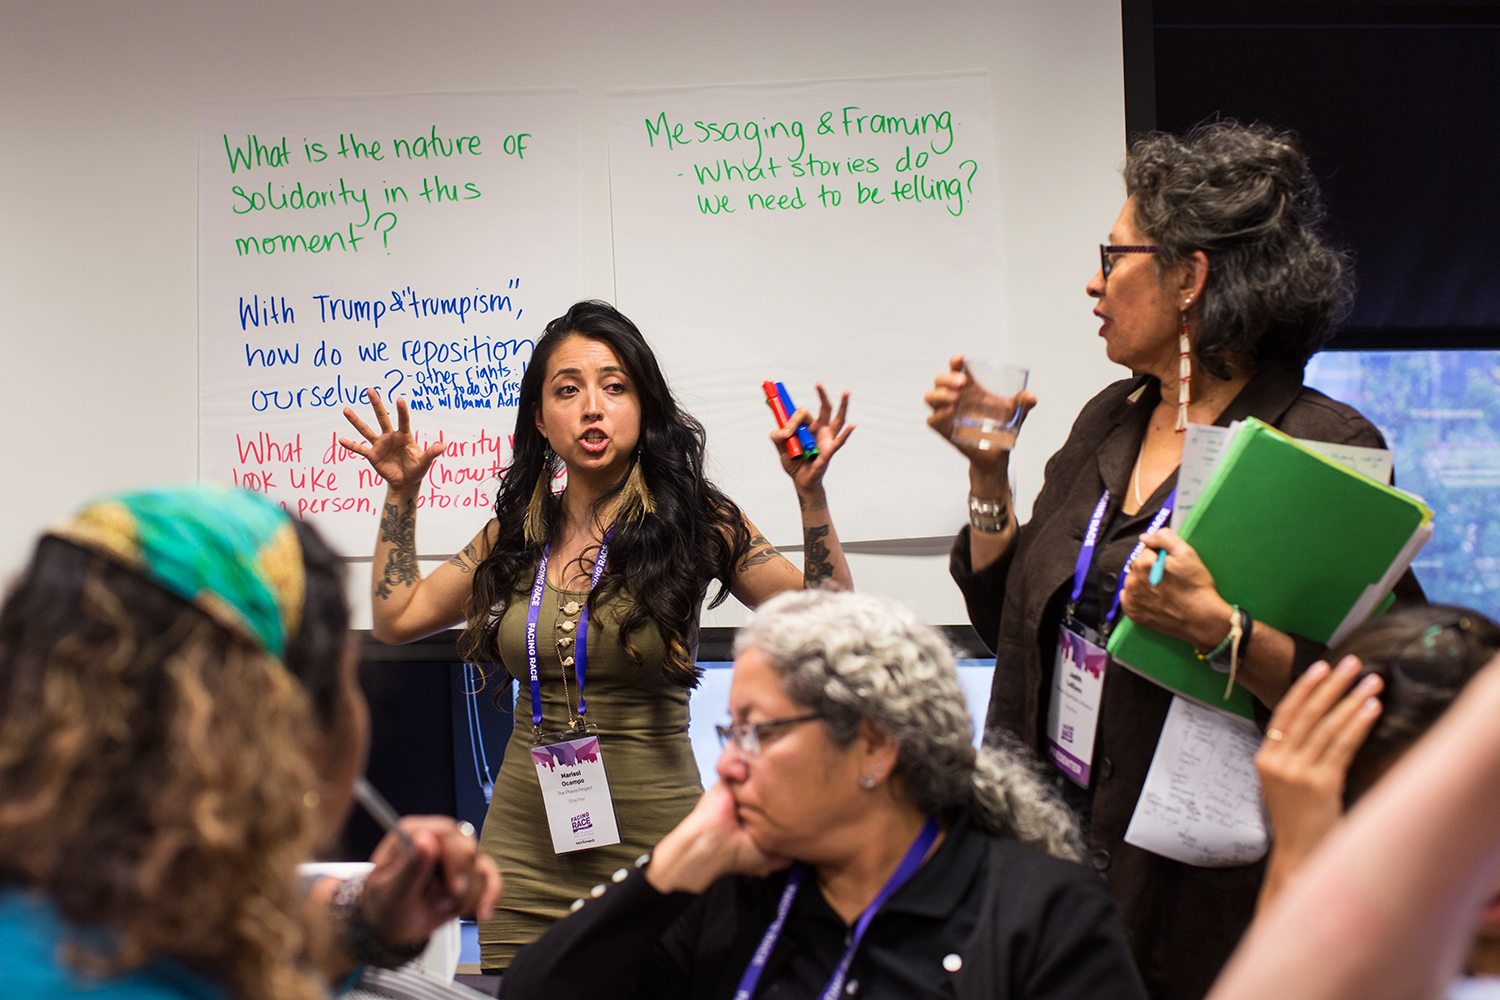  The  Praxis Project 's Marisol Ocampo speaks and take notes for the group during "Solidarity with Standing Rock" breakout session during Facing Race 2016, Atlanta, GA, 11 November 